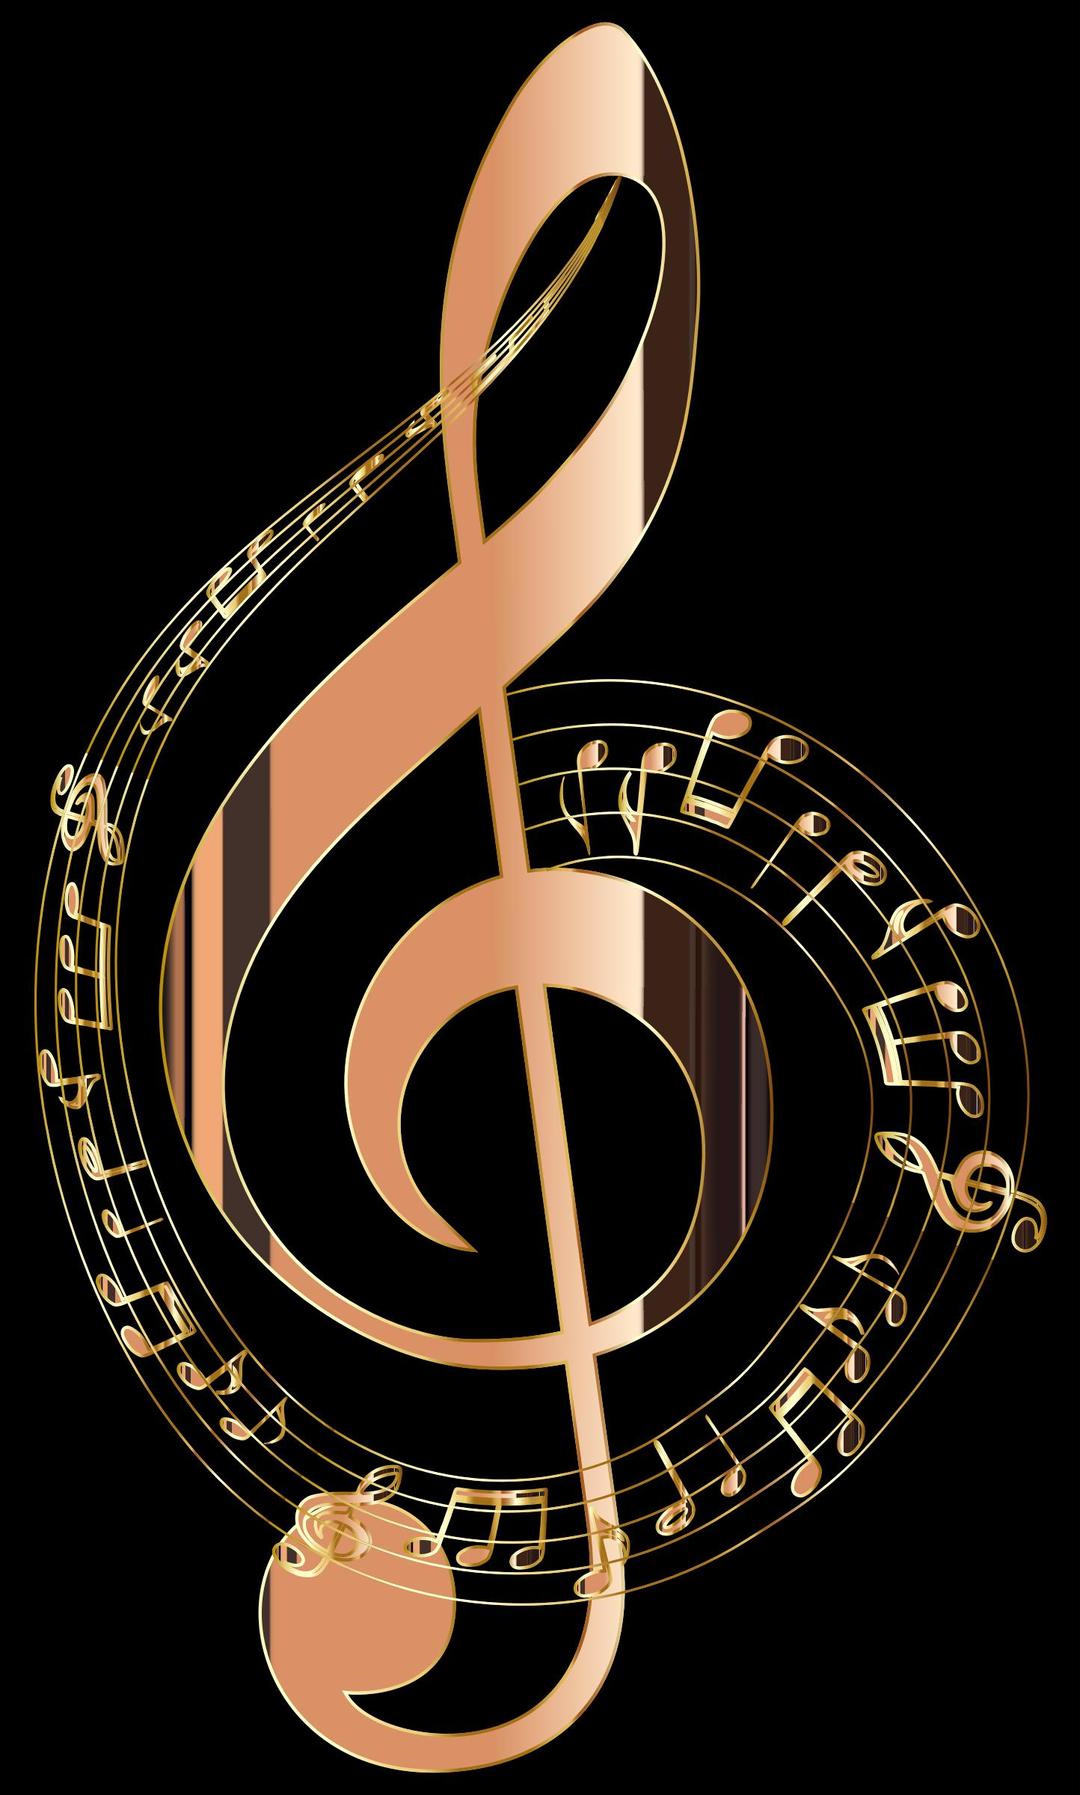 Shiny Copper Musical Notes Typography png transparent